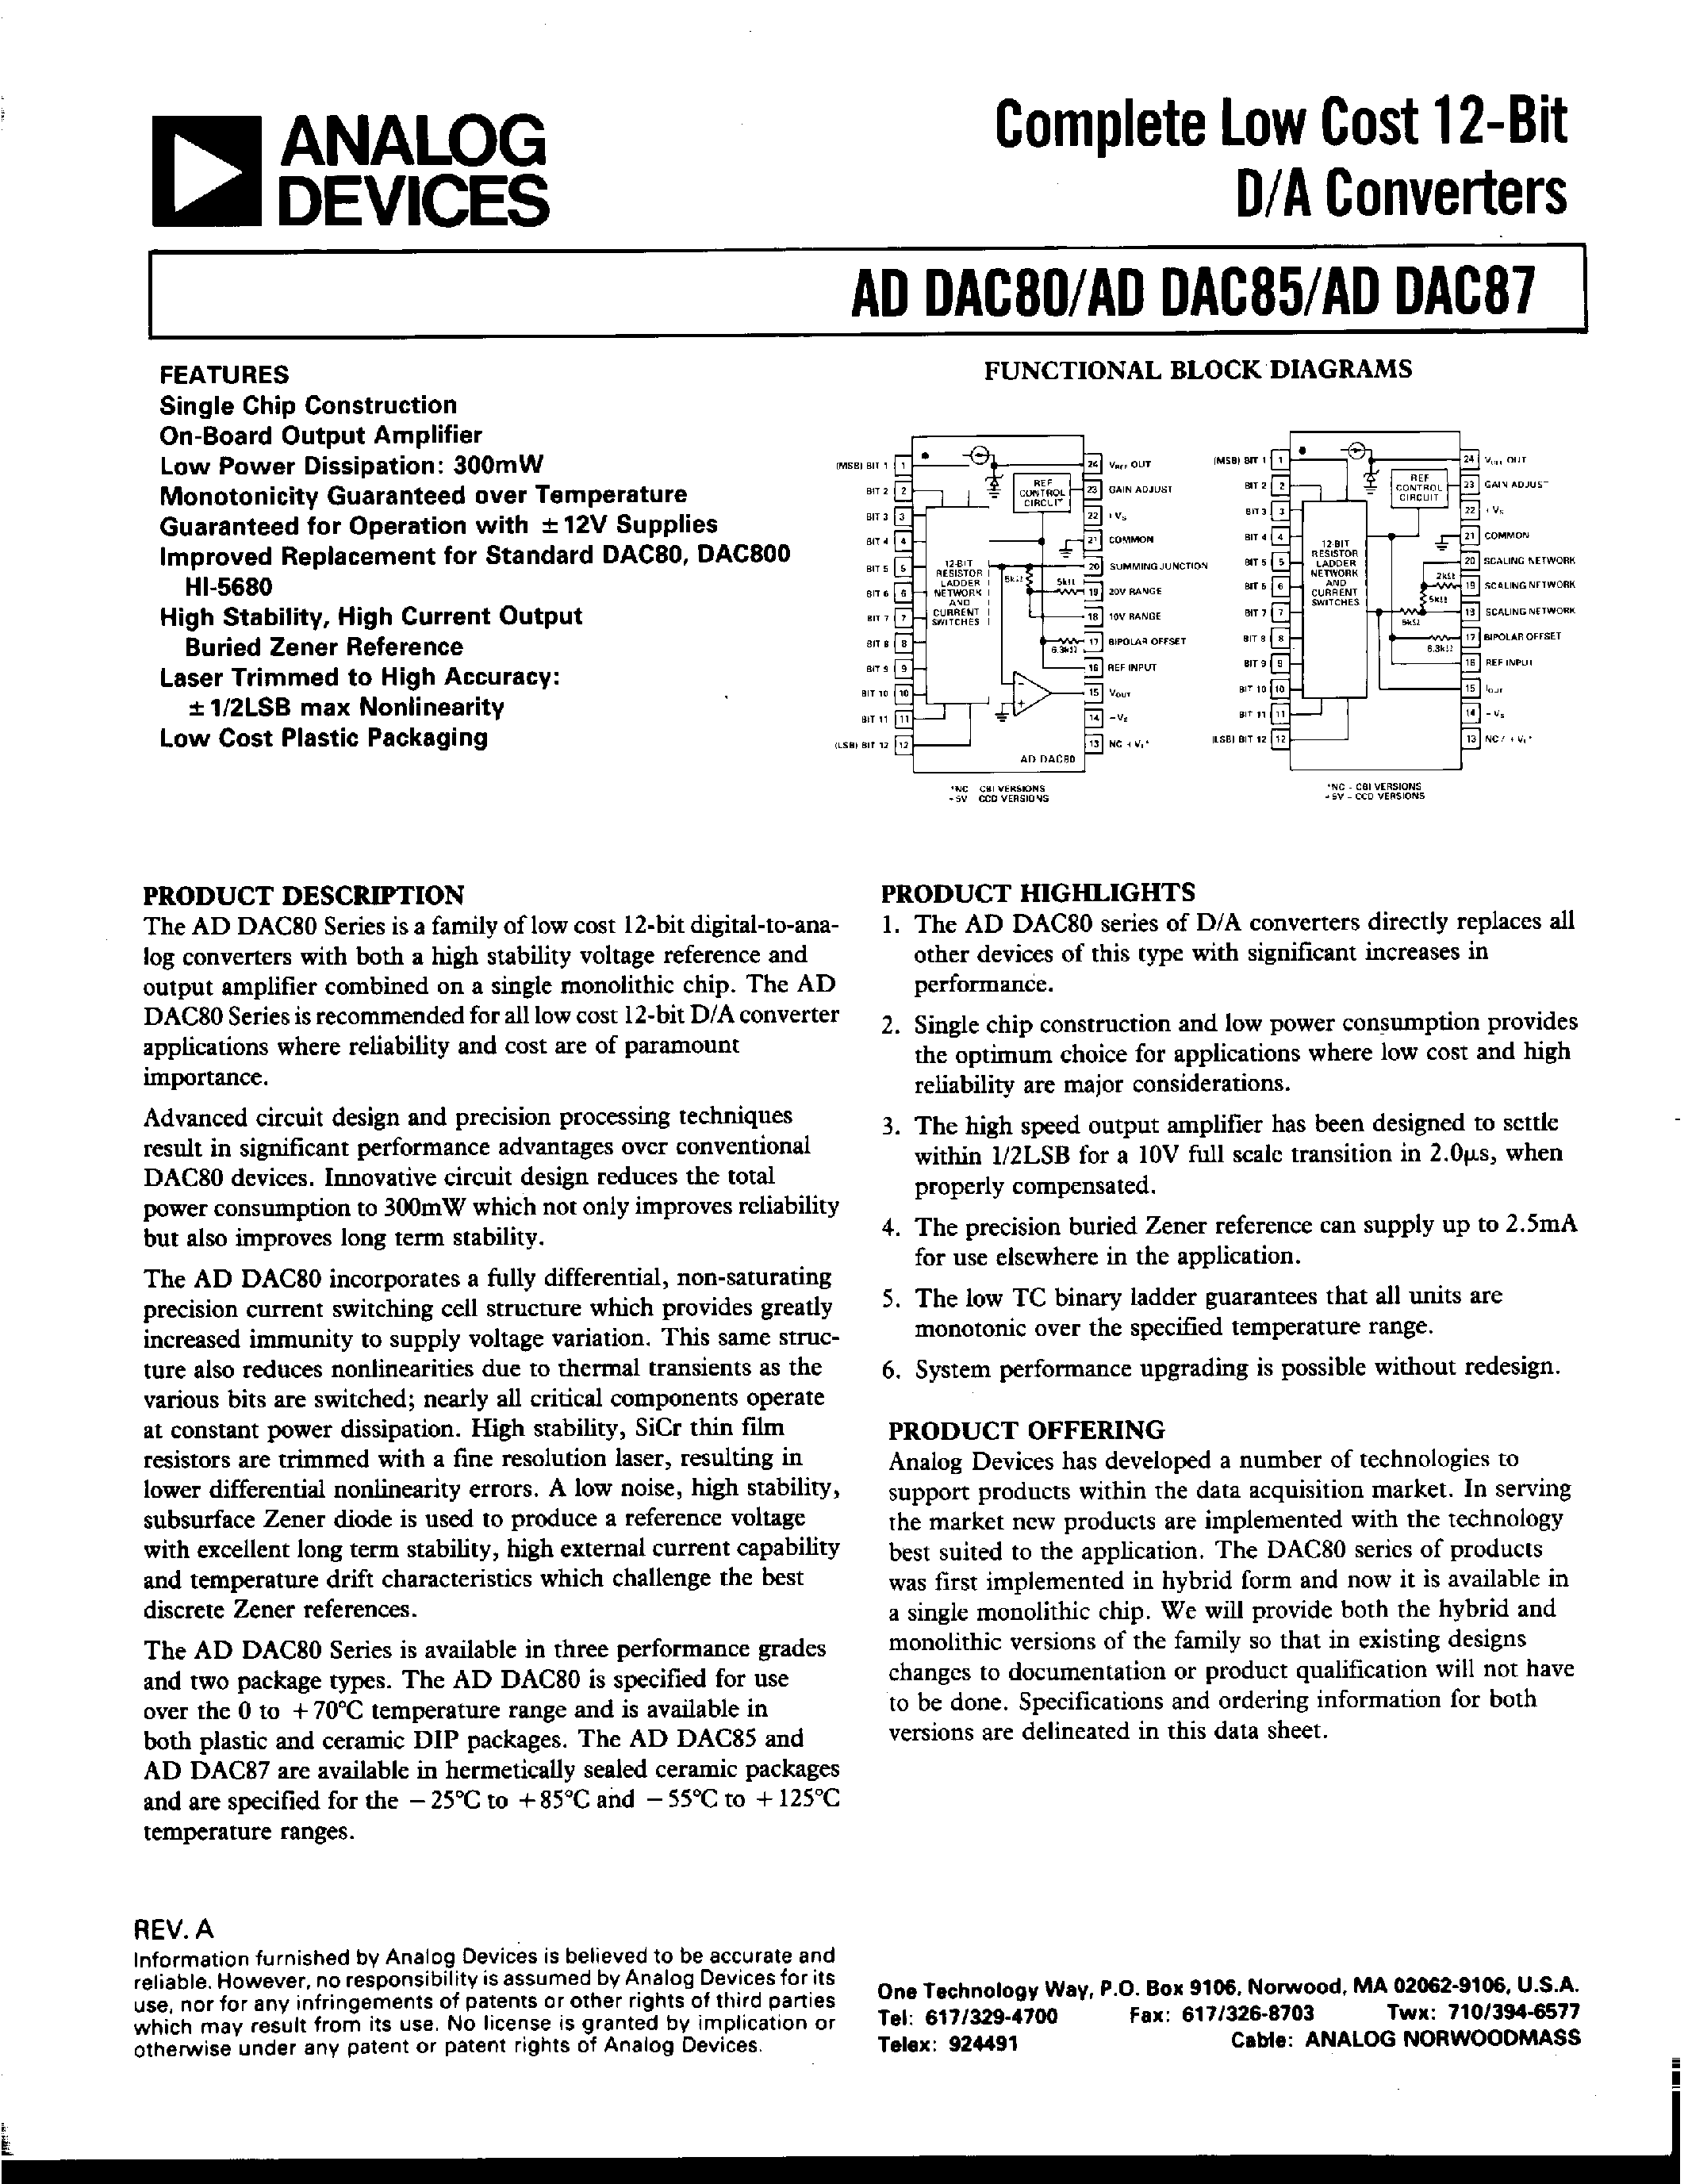 Datasheet ADDAC85C-CCD-I - COMPLETE LOW COST 12-BIT D/A CONVERTERS page 1